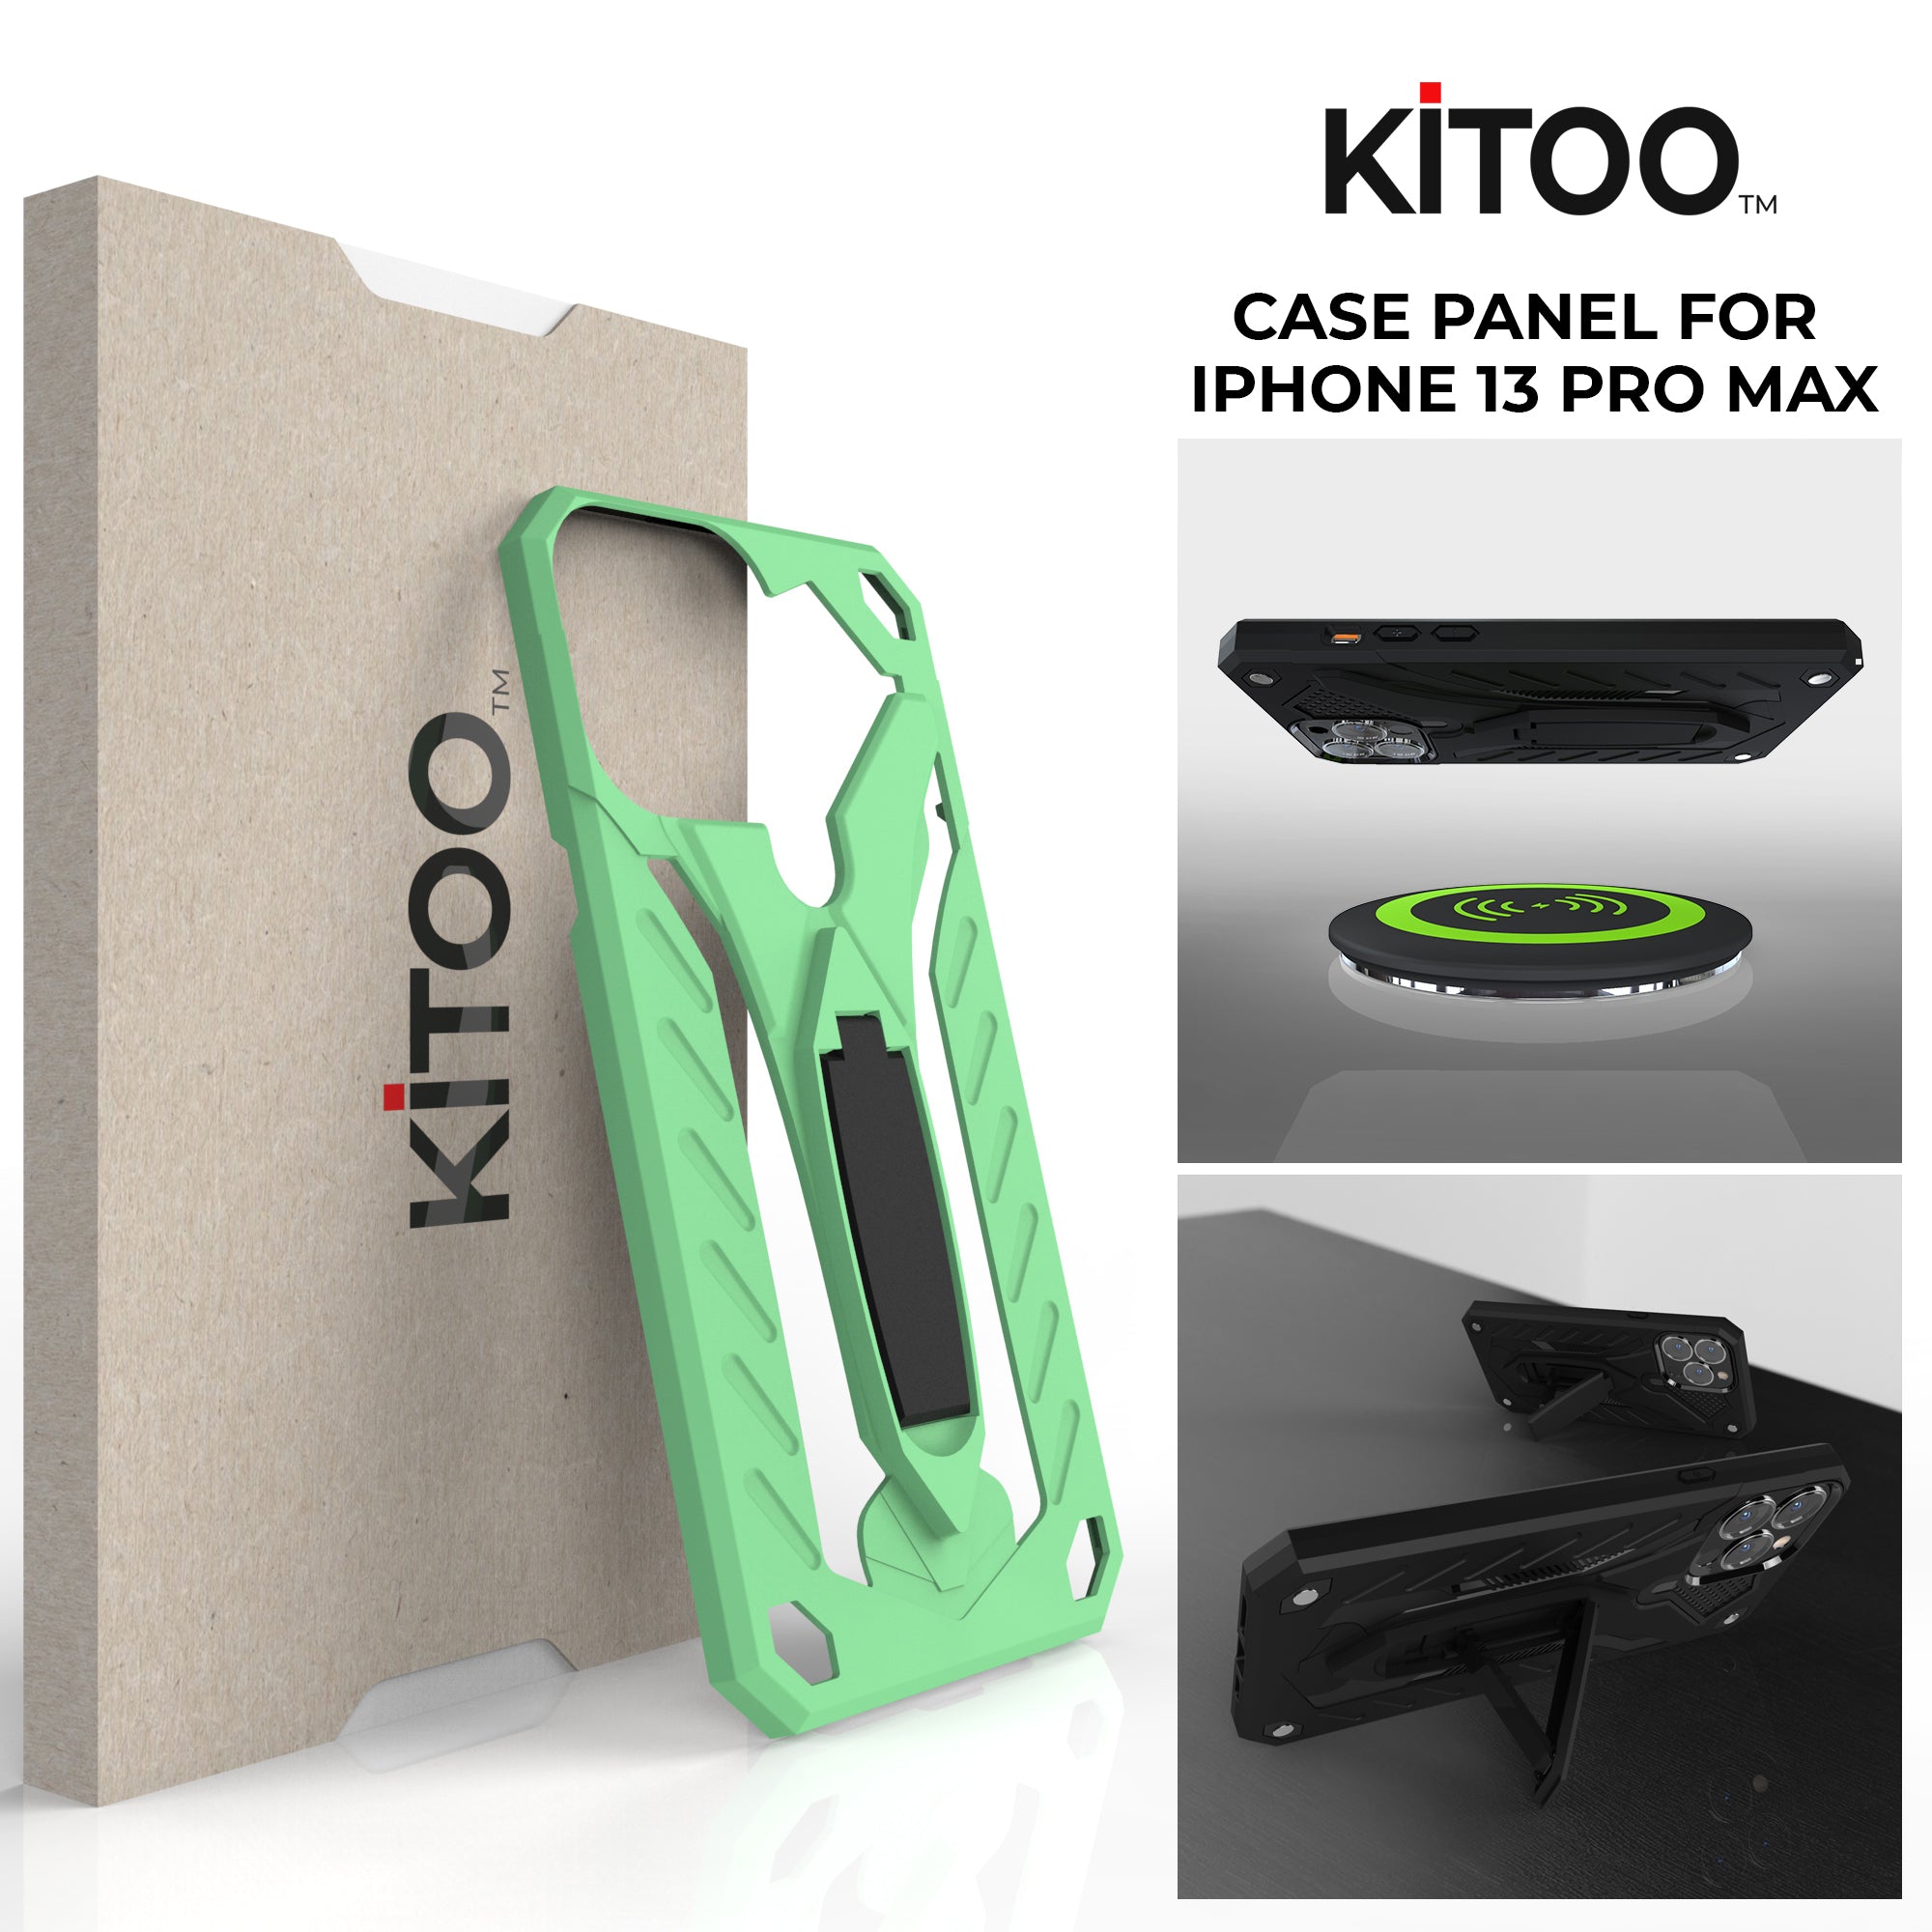 Kitoo Kiсkstand Panel Designed for iPhone 13 Pro Max case (Spare Part only) - Green